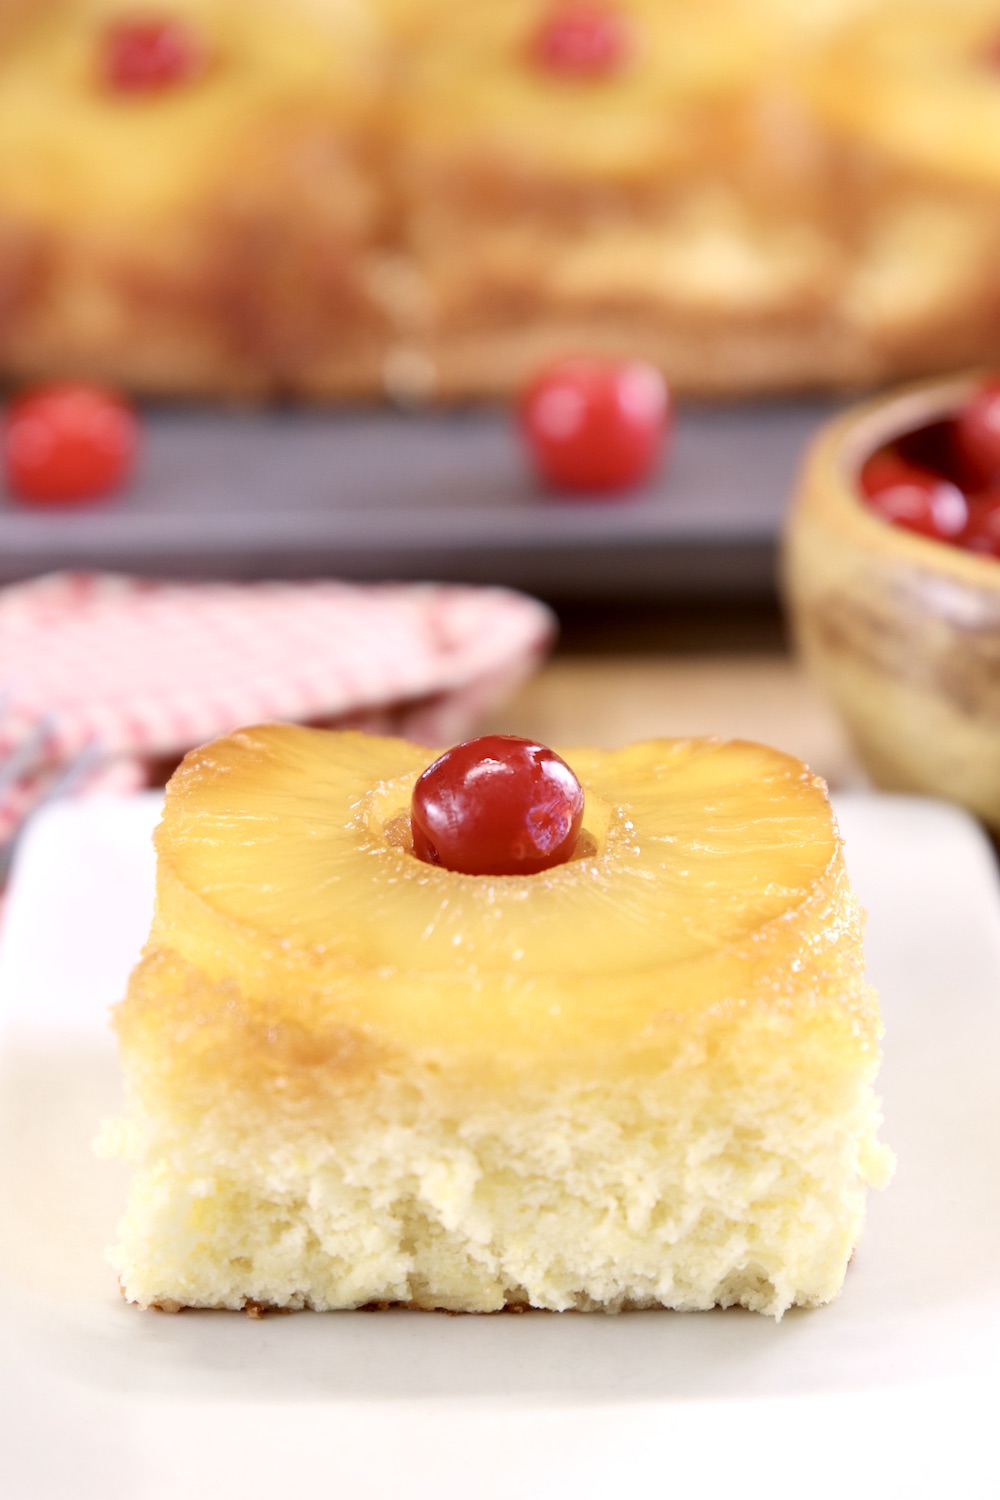 Easy Pineapple Upside Down Cake - And Hattie Makes Three